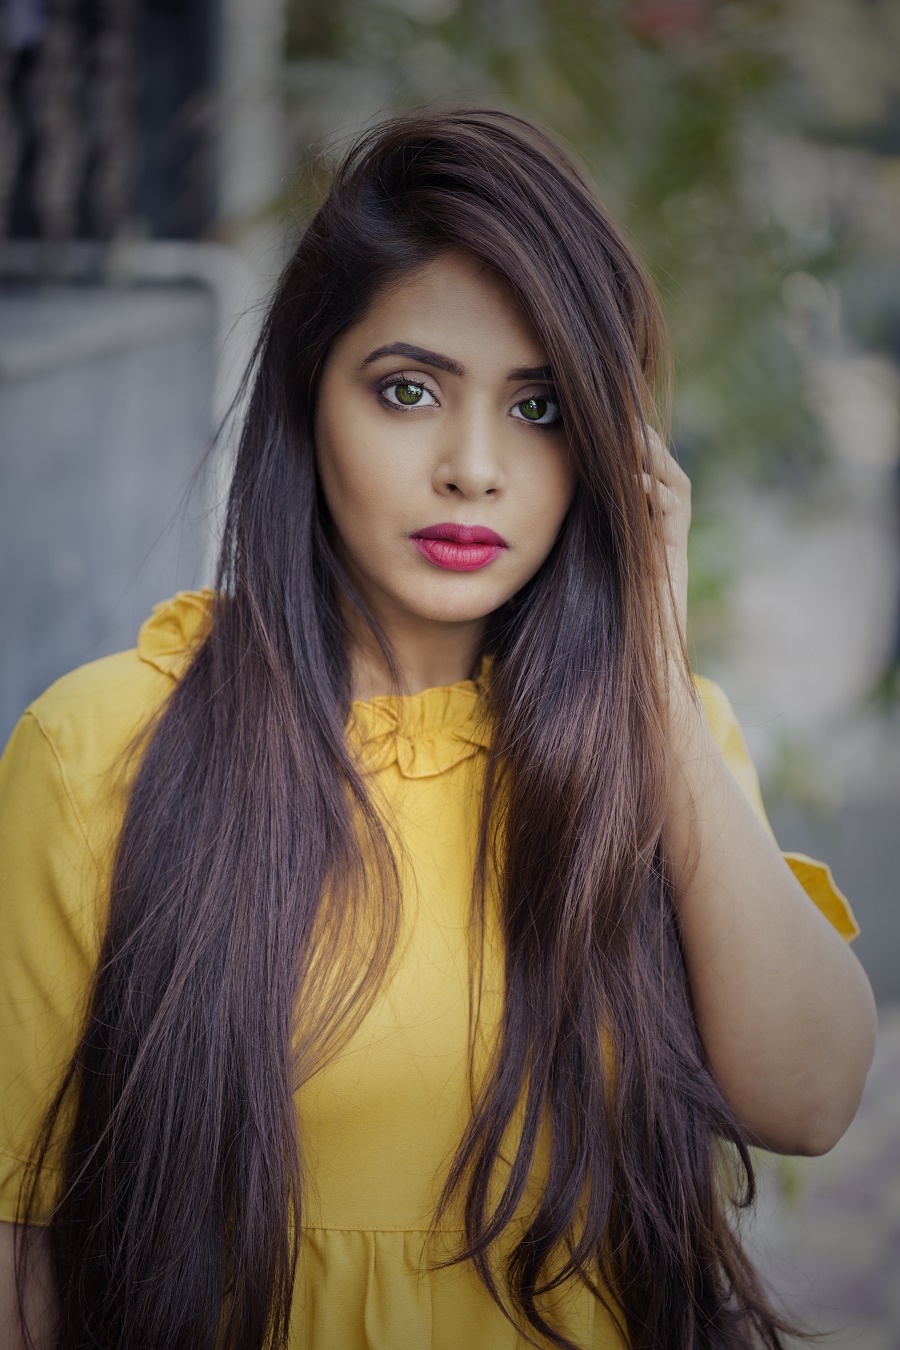 Fresh Look Colour Contact Lenses: Review, Photos, PricePetite Peeve|Indian  Fashion and Lifestyle Blog|Delhi Blogger|Street Style